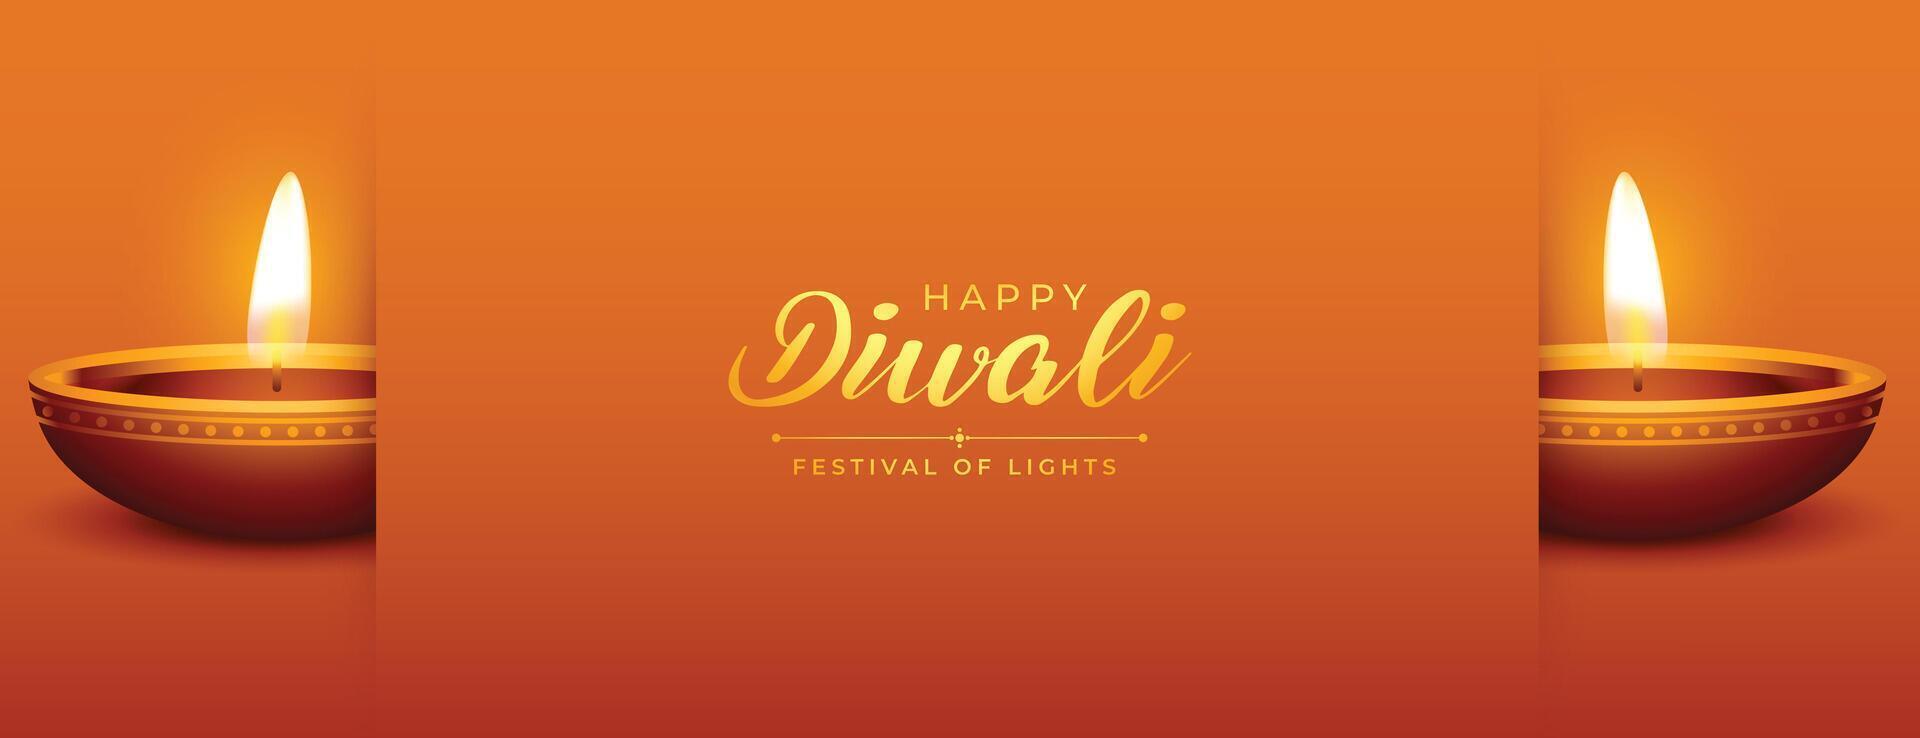 happy diwali festival of lights vector design with oil lamp vector